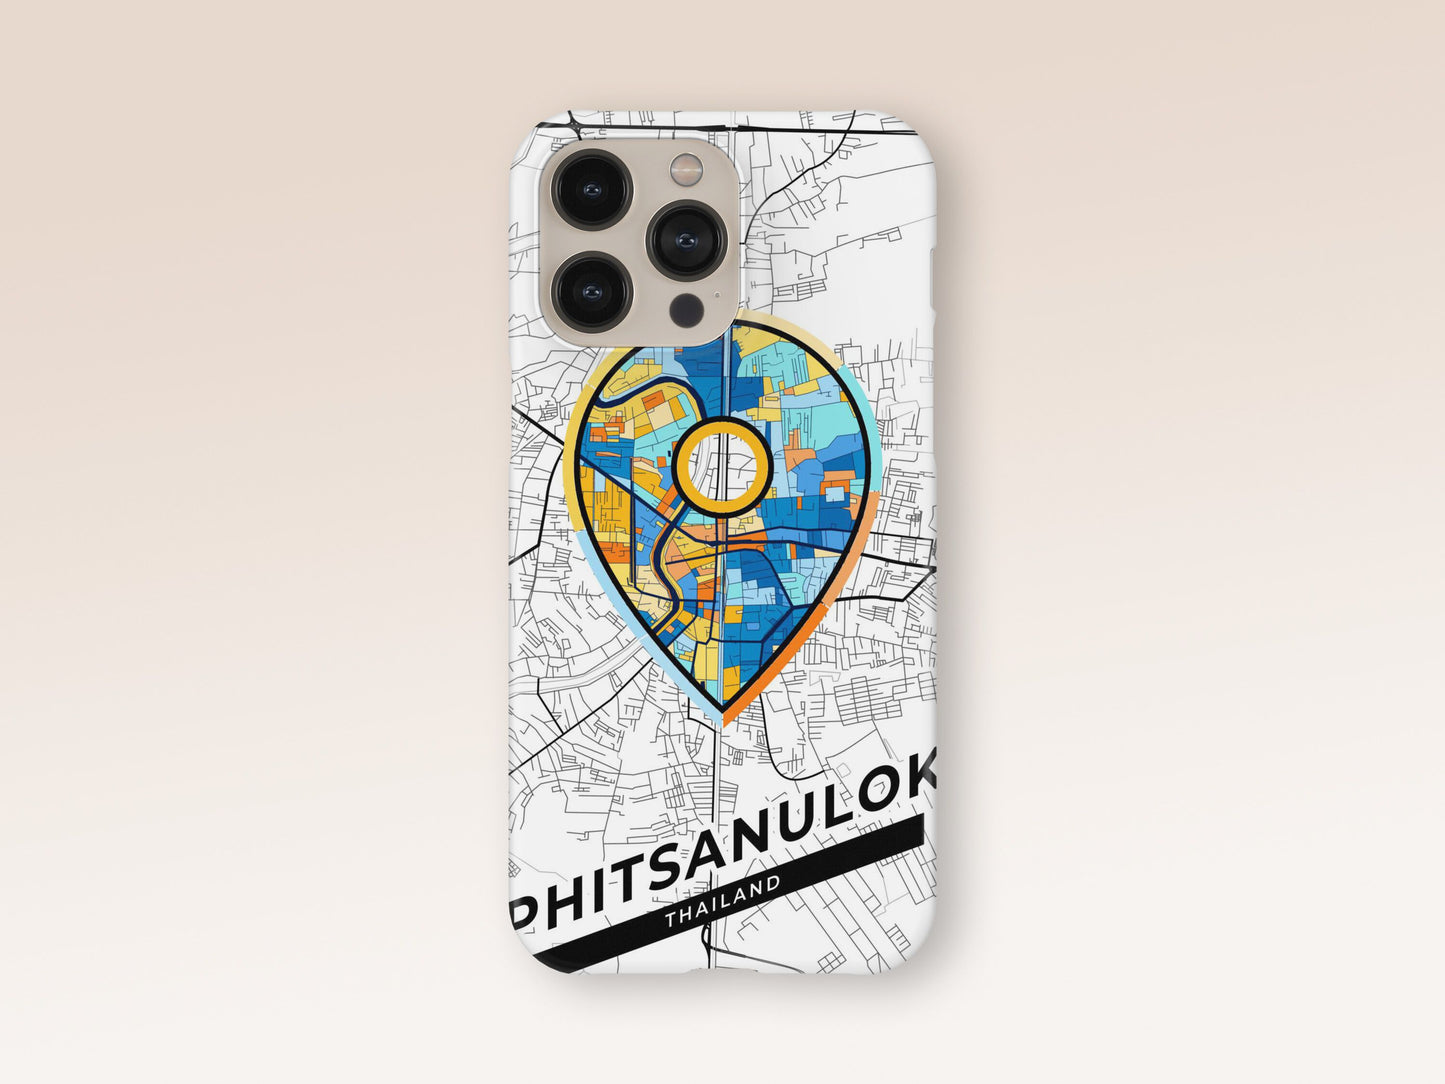 Phitsanulok Thailand slim phone case with colorful icon 1